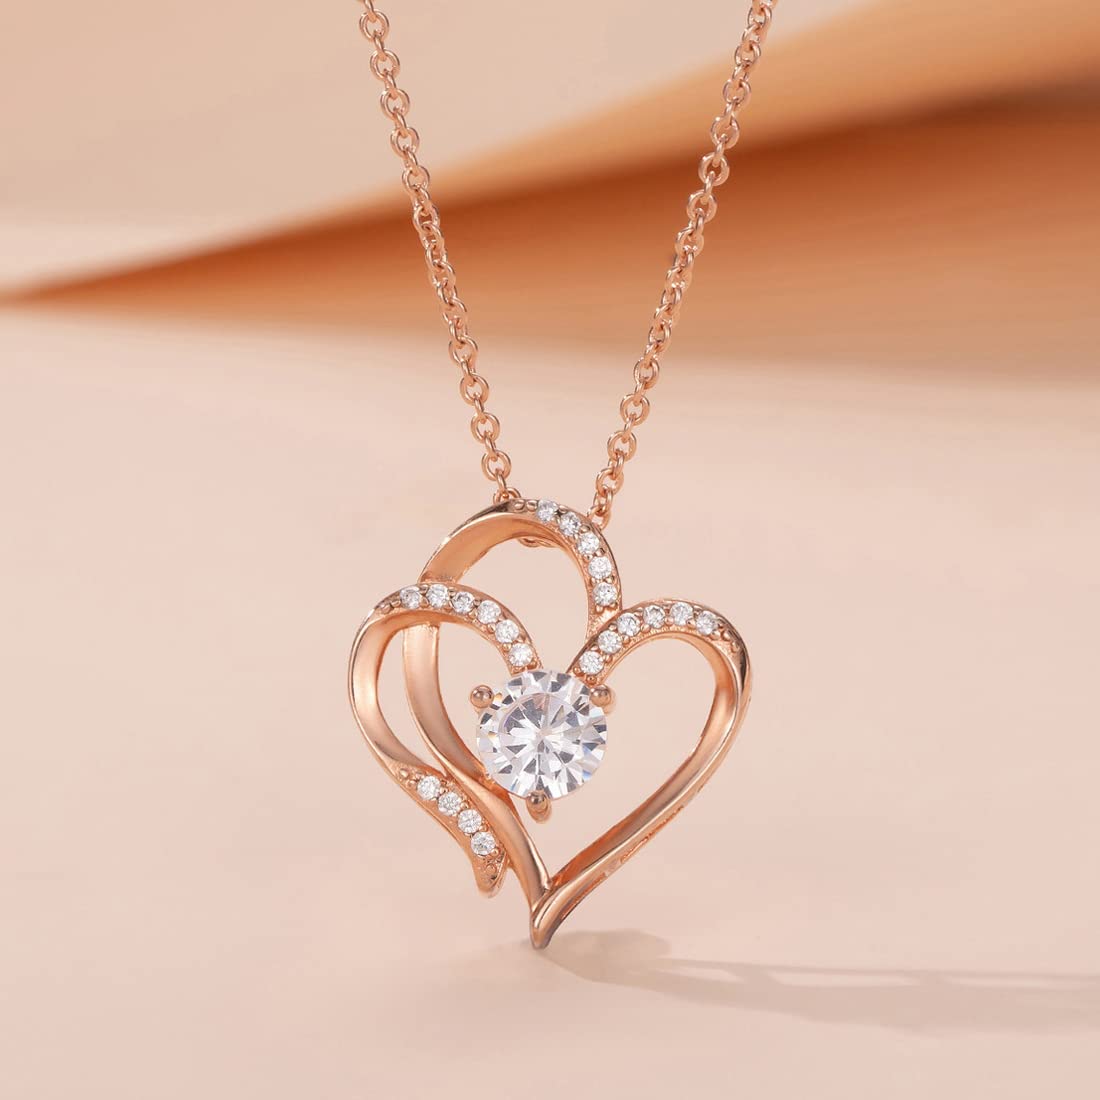 Yellow Chimes Pendant for Women and Girls Heart Pendant for Women | Valentines Special Rose Gold Plated Heart Pendant Chain | Birthday Gift for girls and women Anniversary Gift for Wife